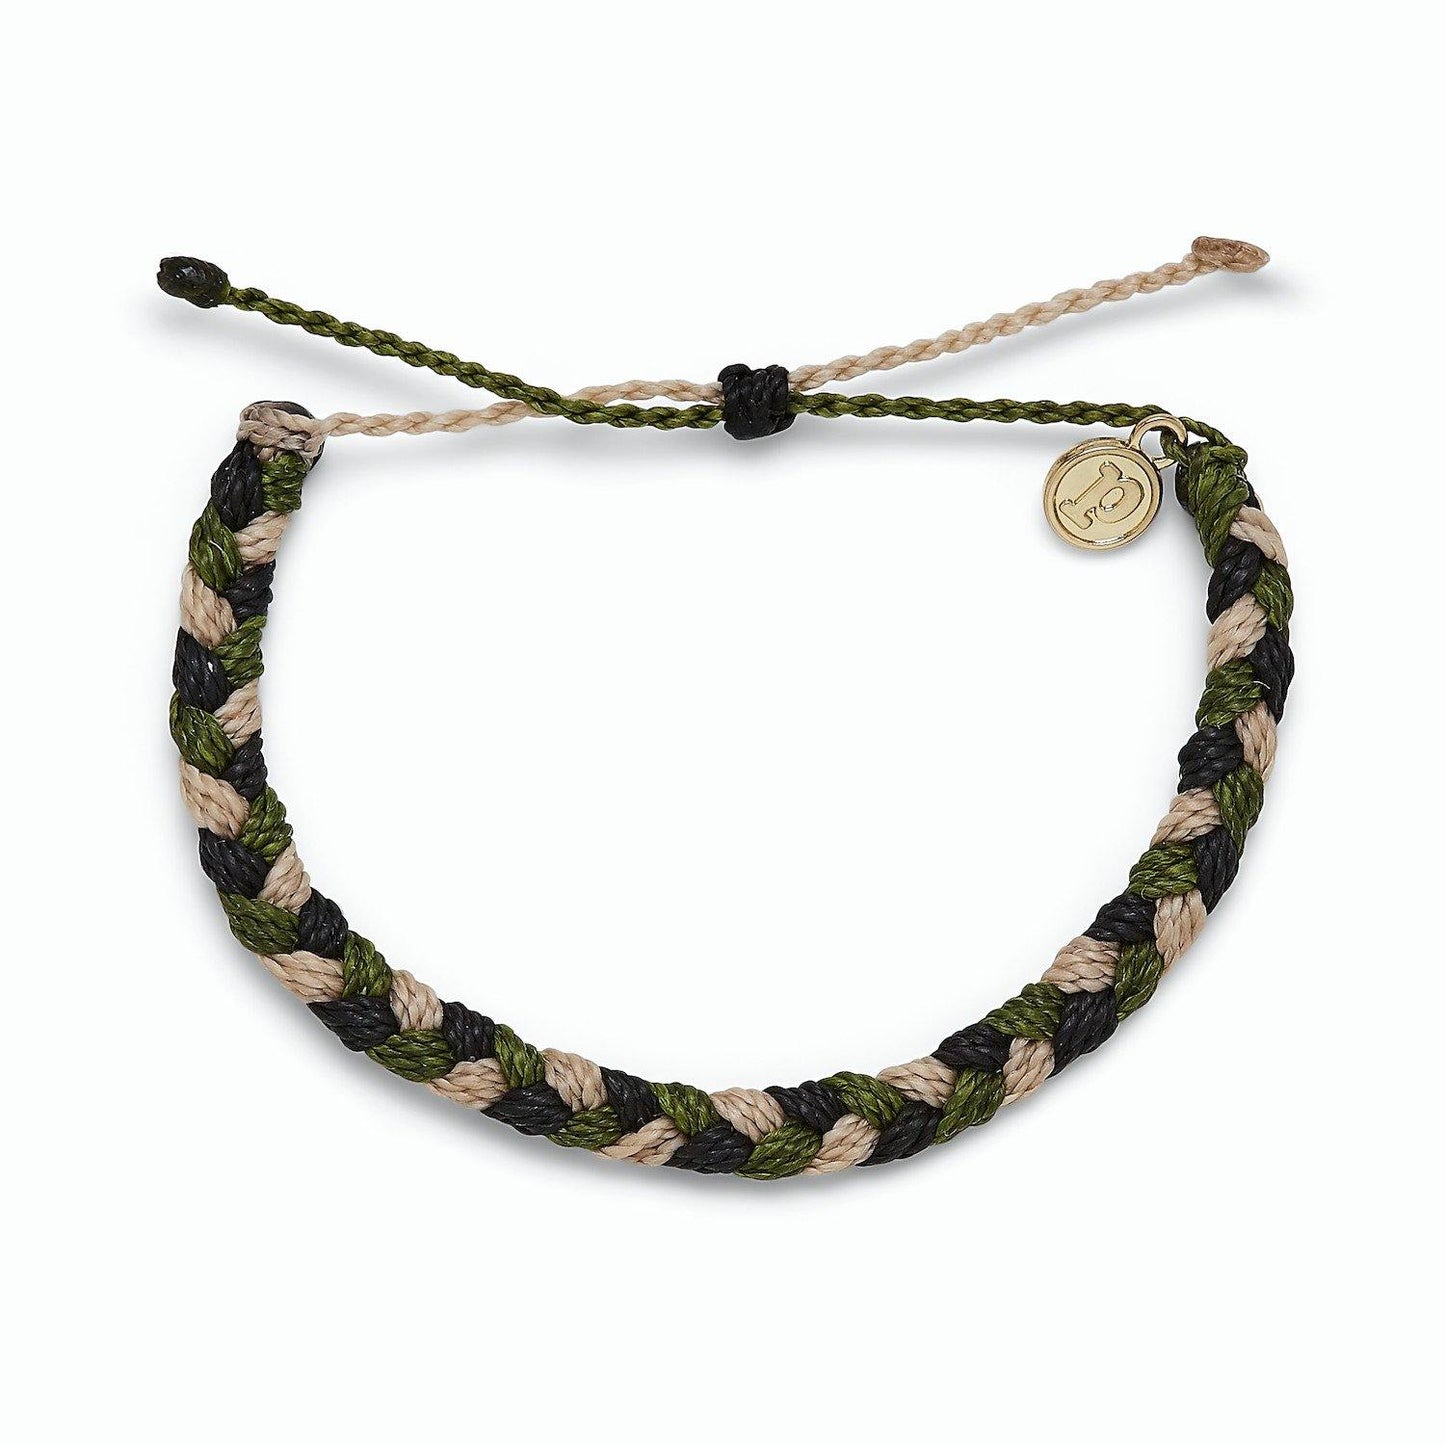 Charity Braid Bracelet - The Salty Mare